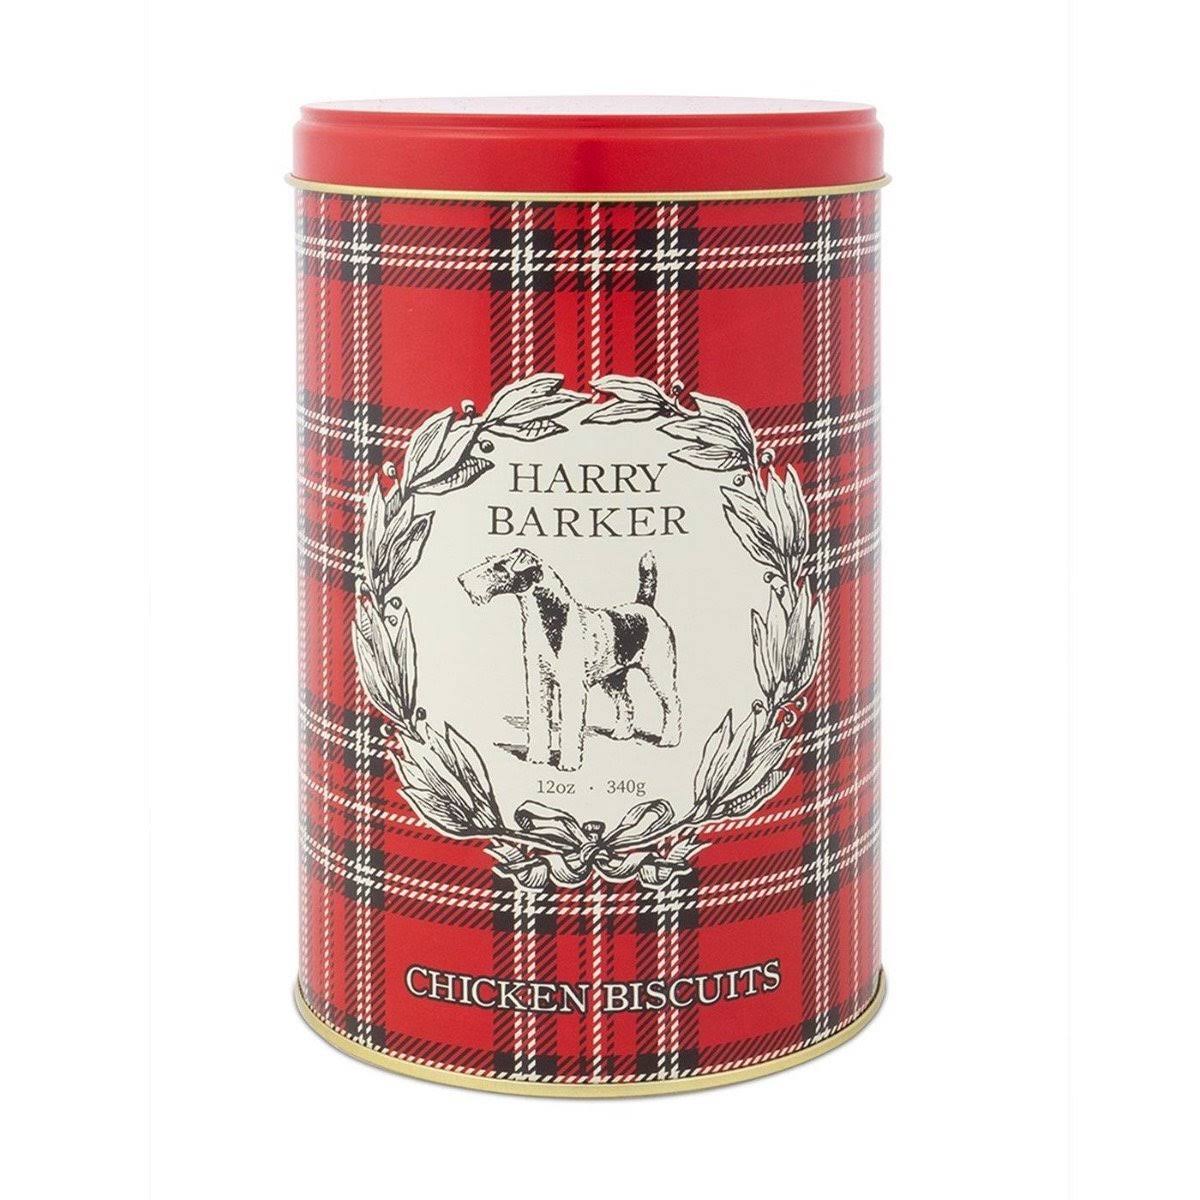 Harry Barker Dog Biscuits Tin in Plaid